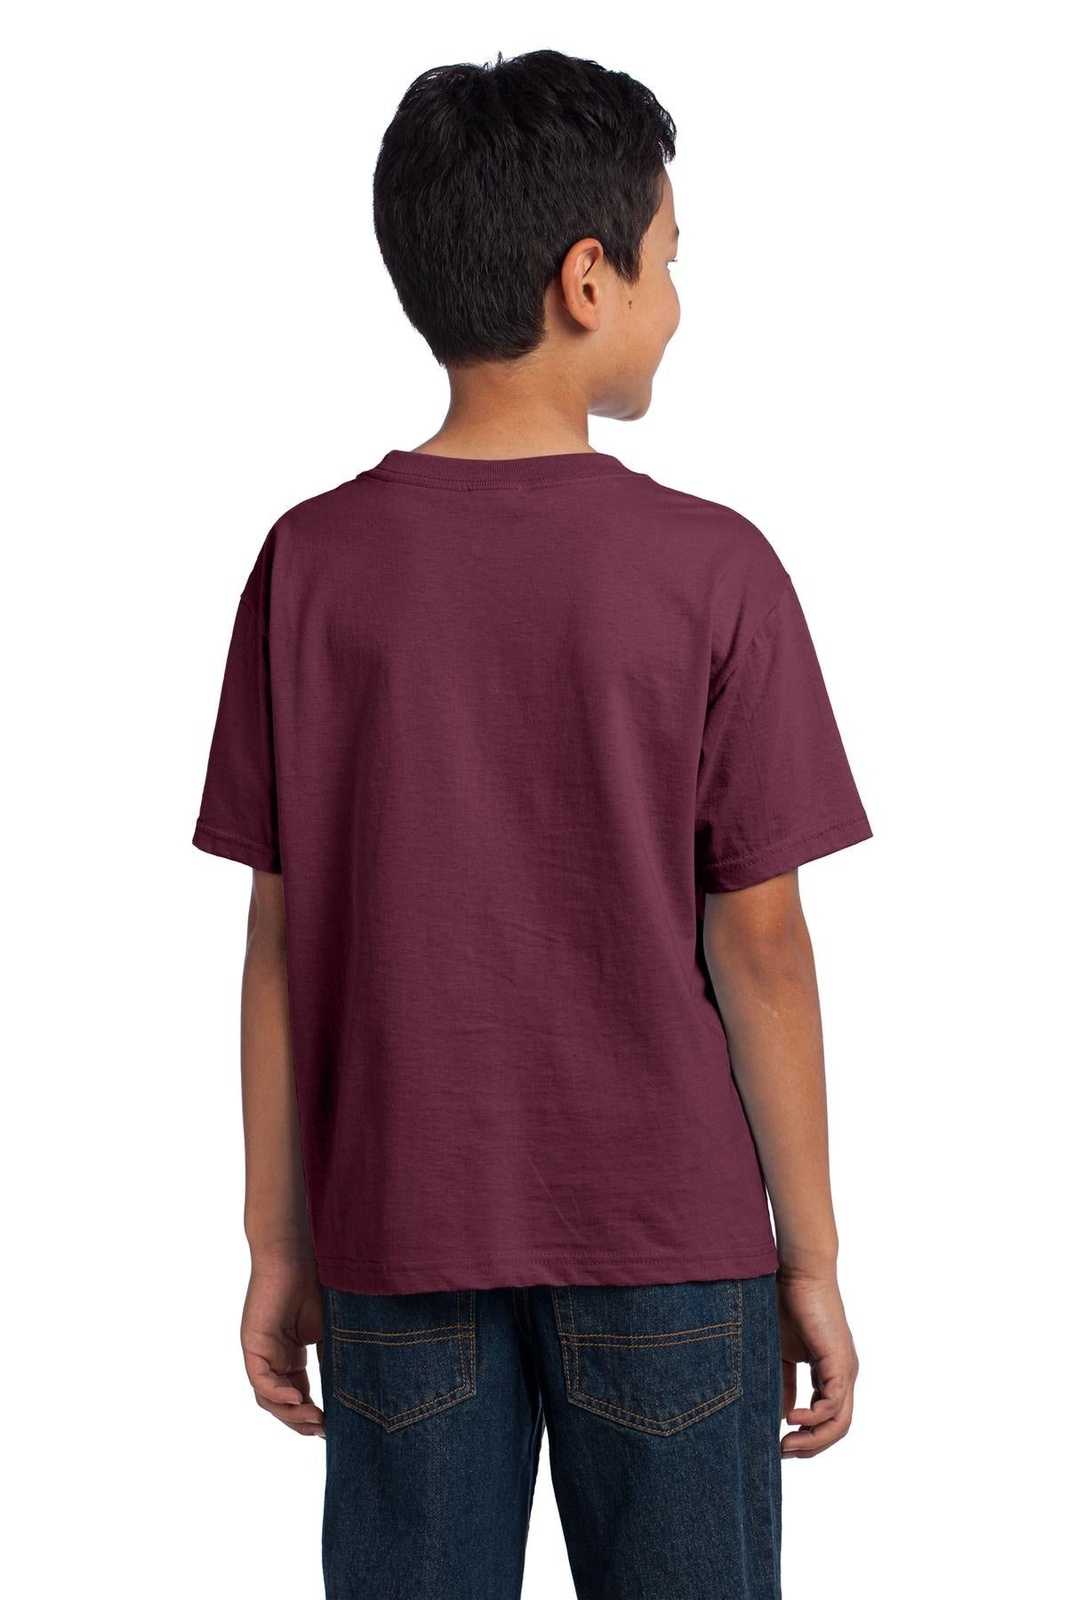 Fruit of the Loom 3930B Youth HD Cotton 100% Cotton T-Shirt - Maroon - HIT a Double